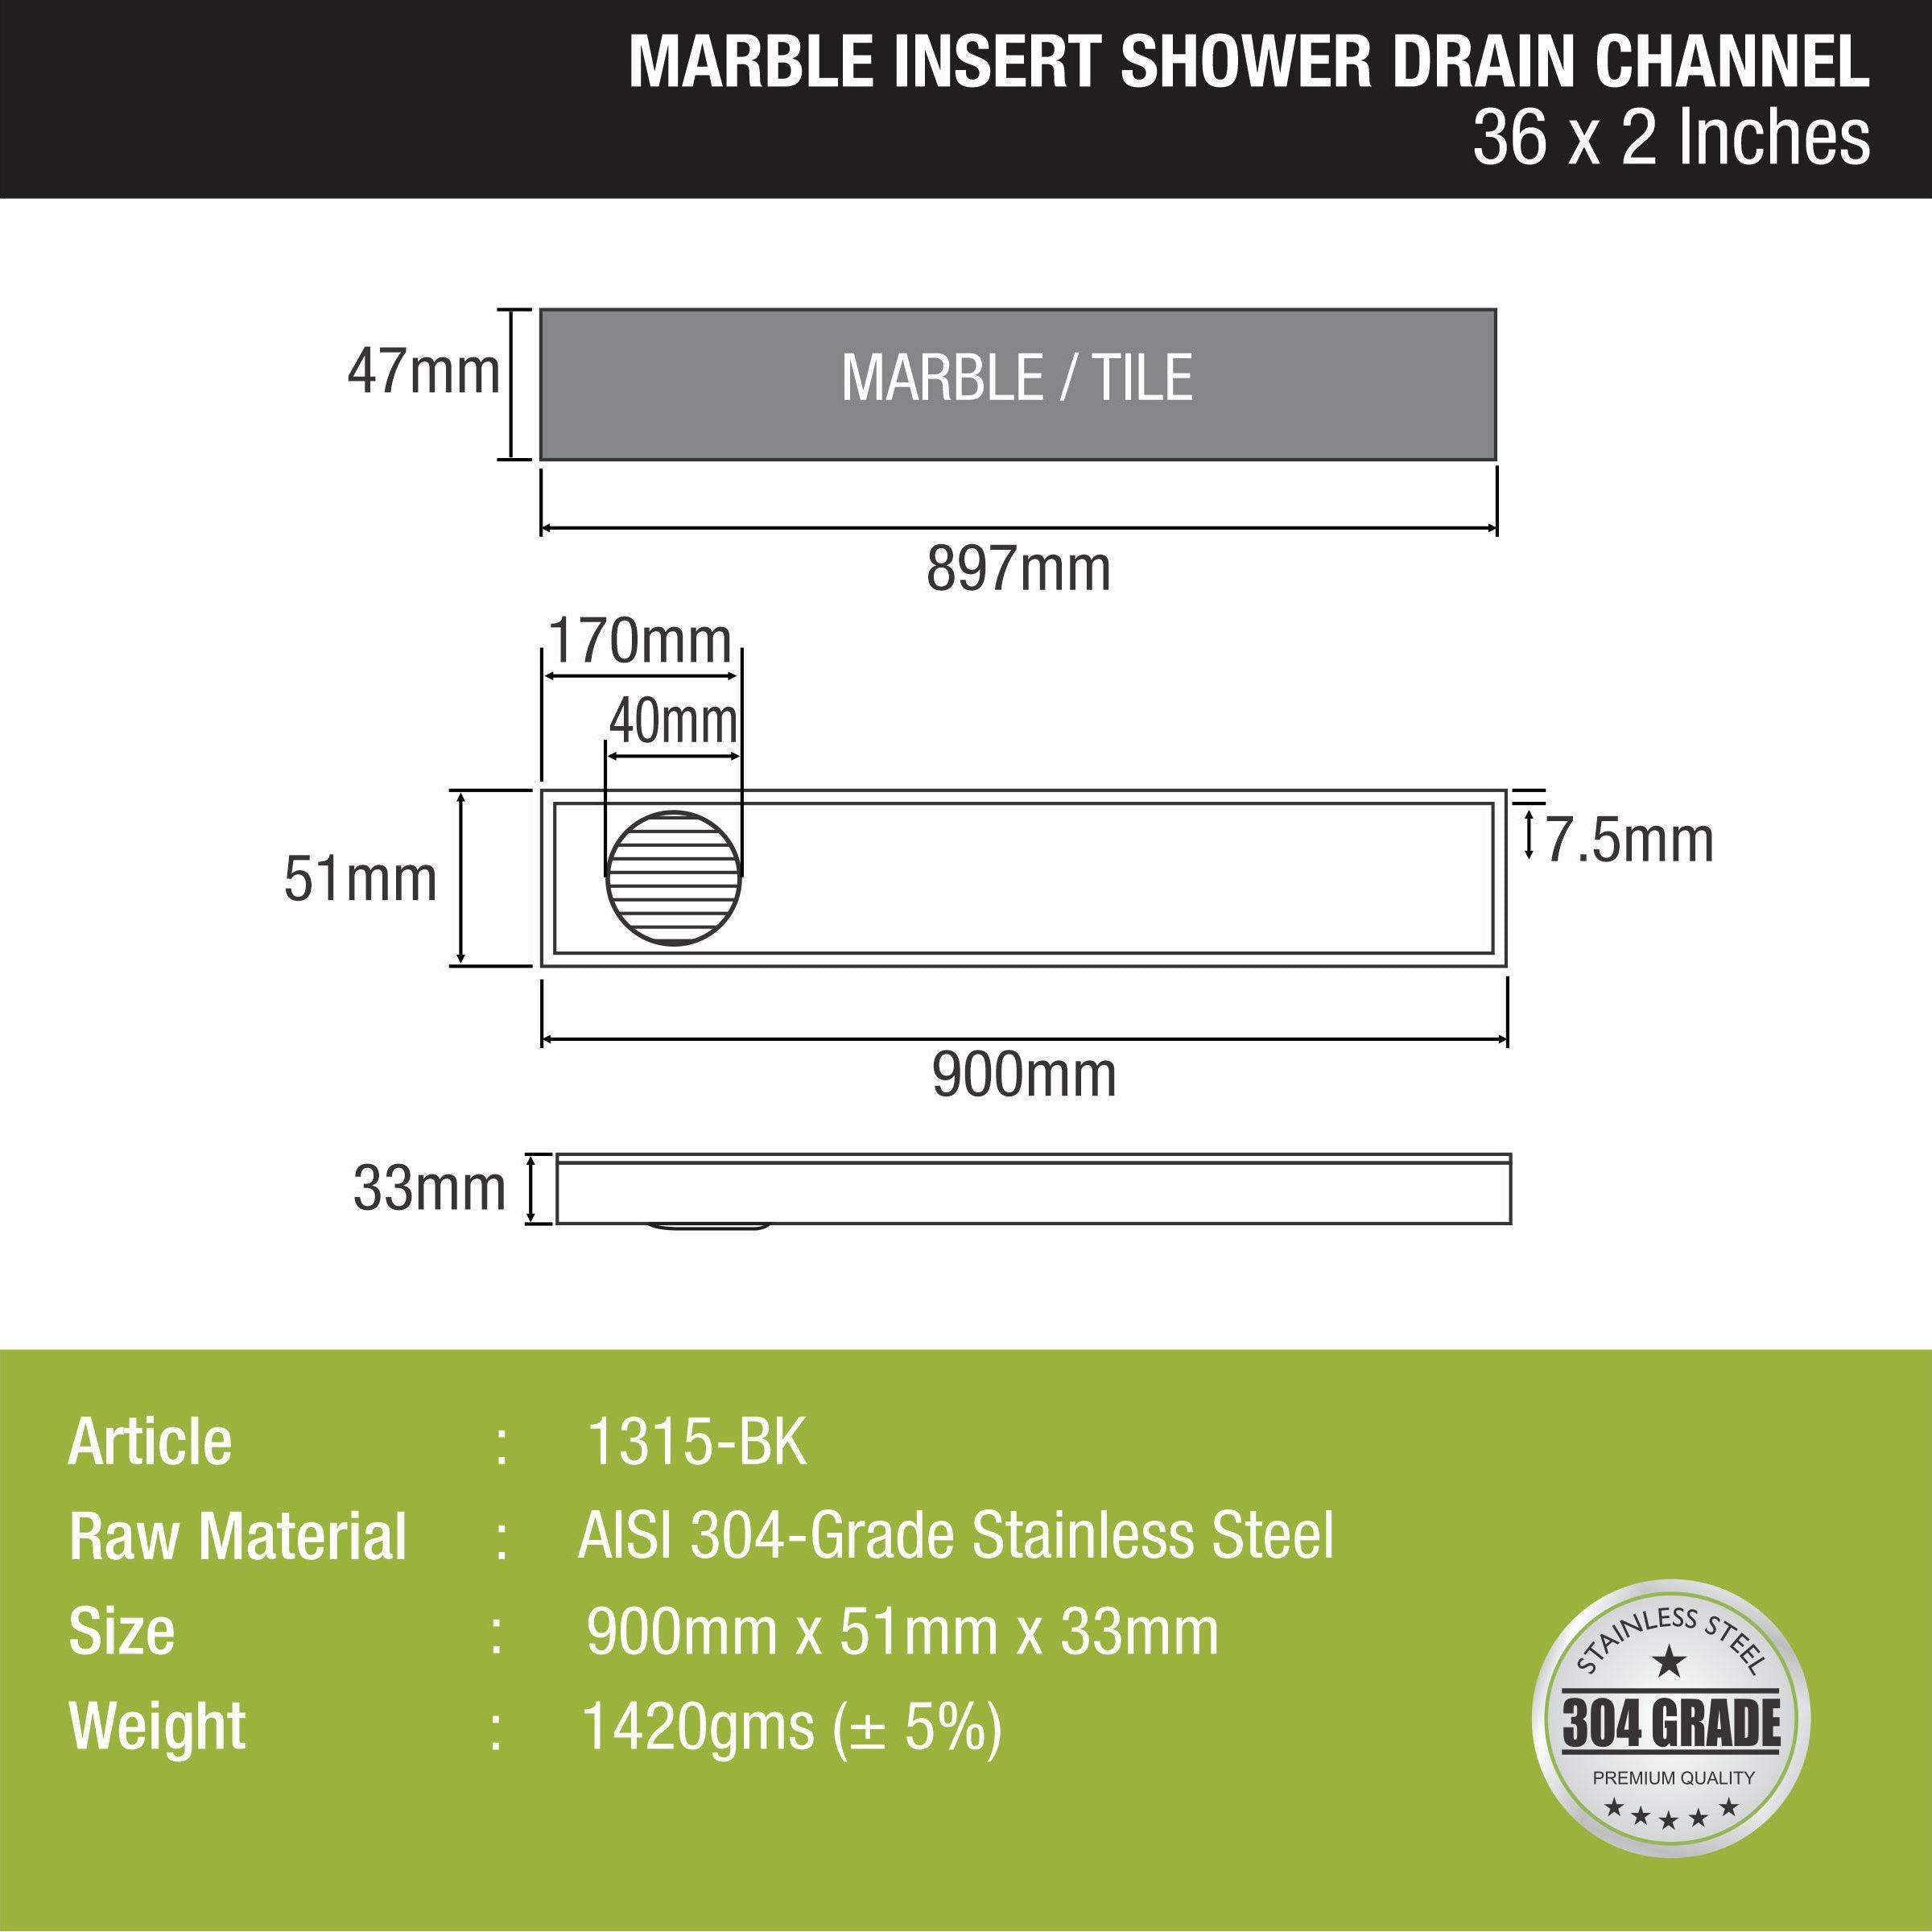 Marble Insert Shower Drain Channel - Black (36 x 2 Inches) size and measurement 